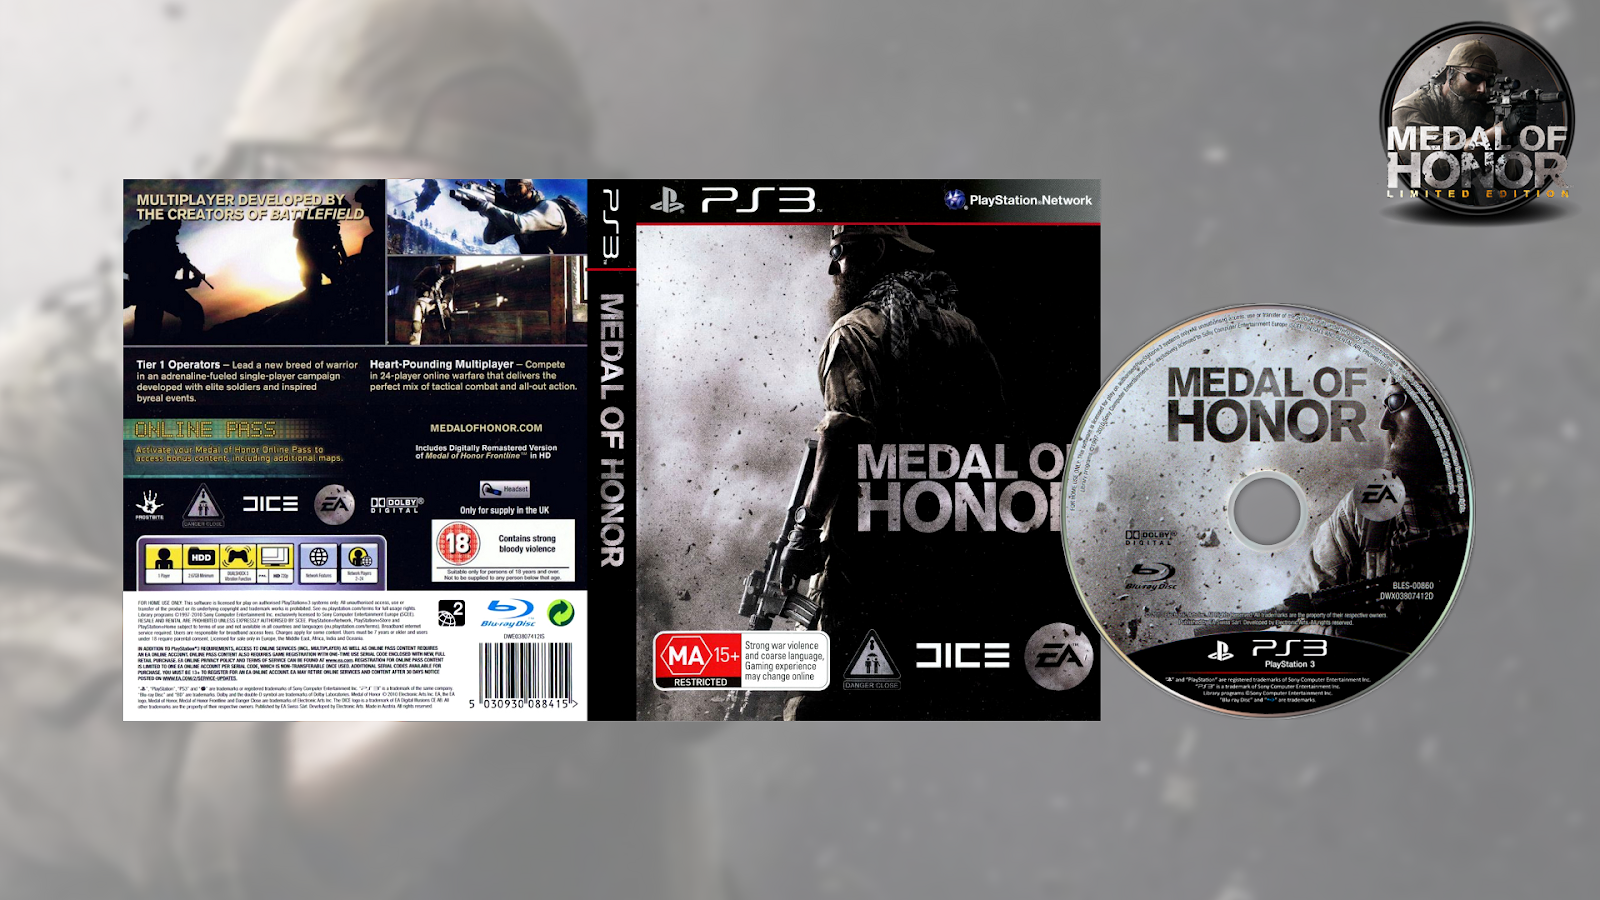 Medal of Honor Limited Edition ps3. Medal of Honor 2010 диск. Medal of Honor ps3 обложка. Медаль за отвагу на ps3. Коды medal